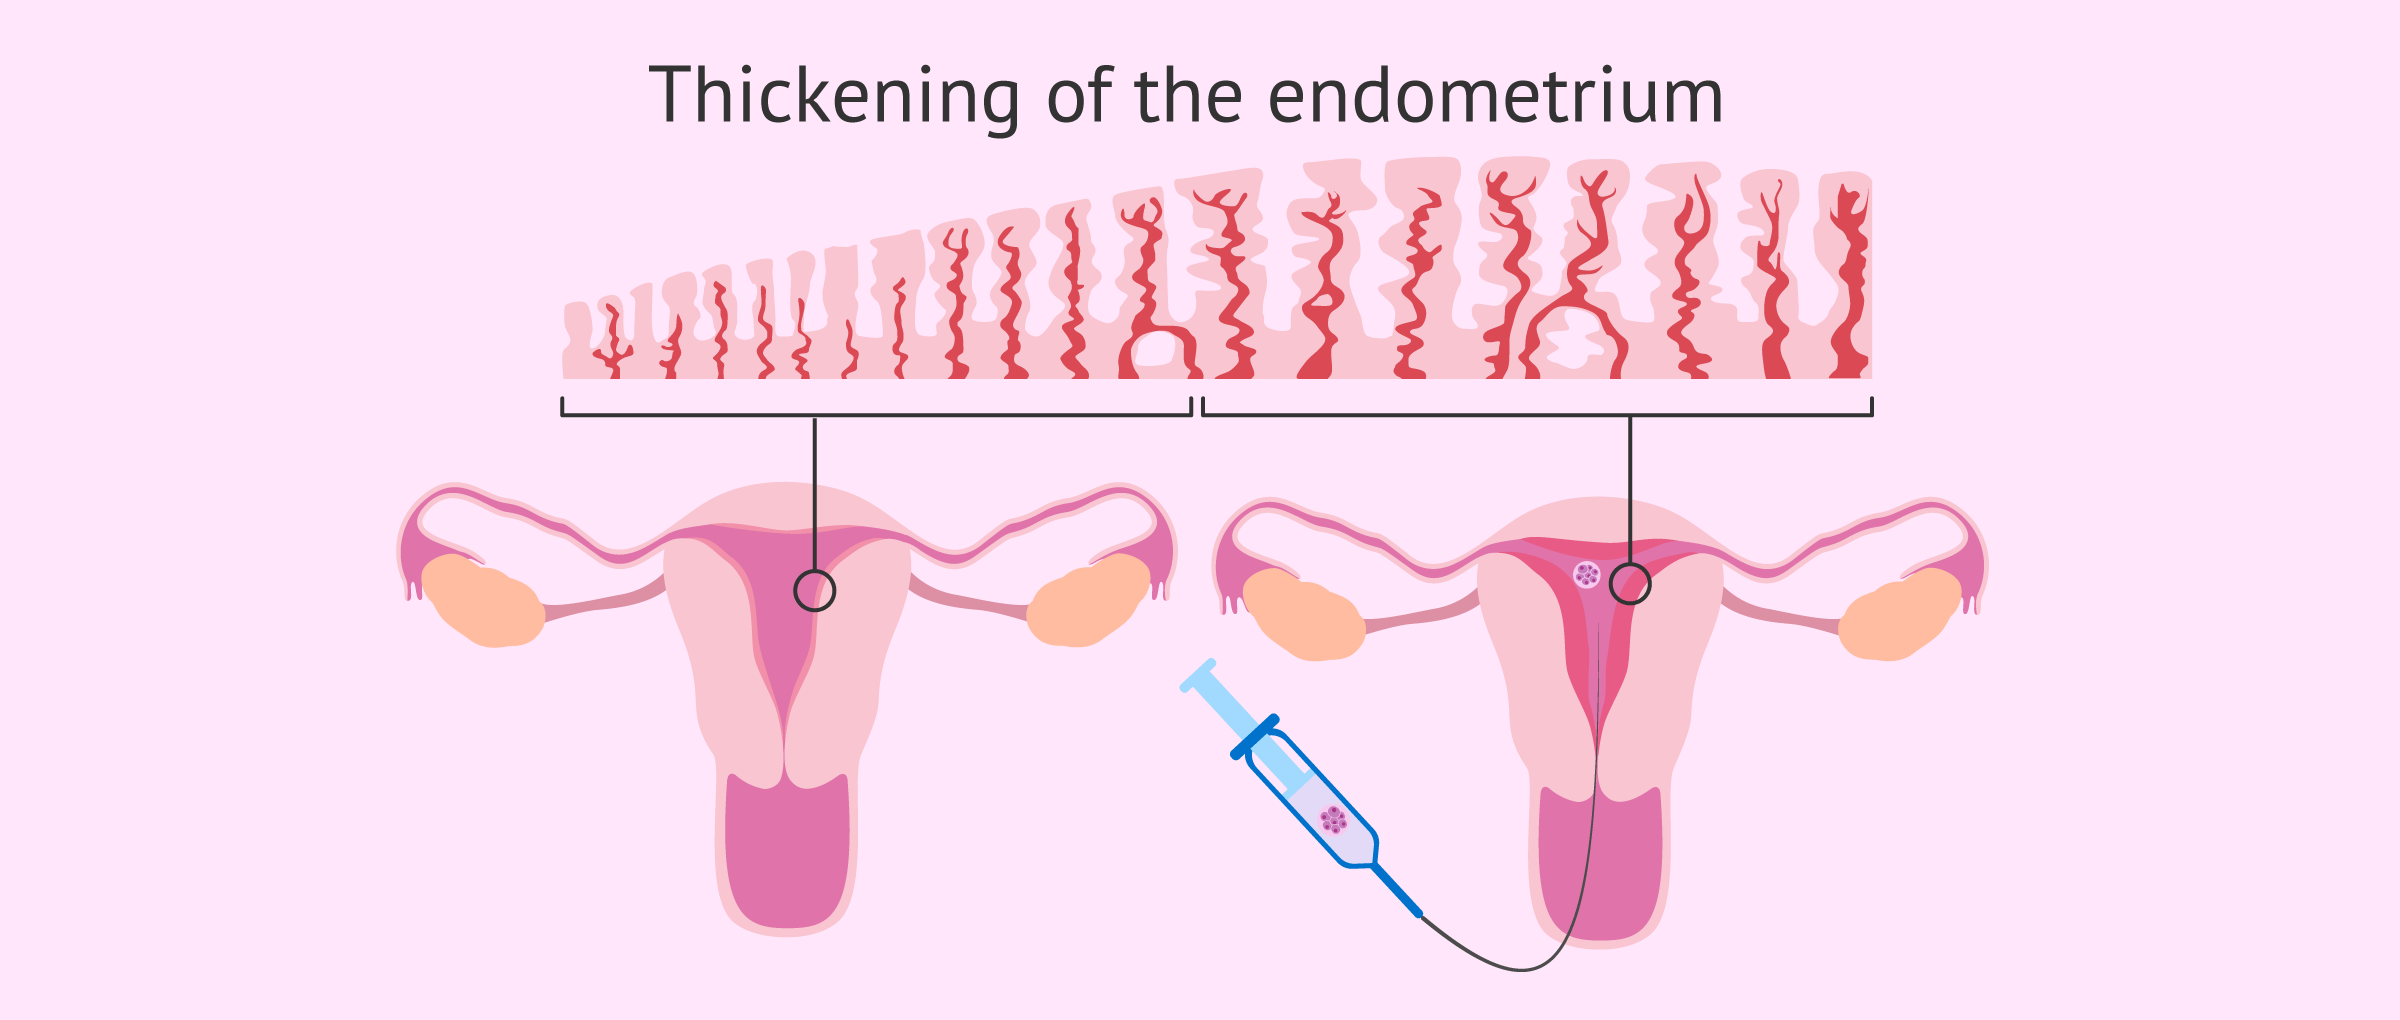 What Does Thickening Of The Womb Lining Mean Abnormally Thickened Endometrium Differential Radiology Reference Article 8mm Thick Uterine Lining After Menopause  samepagehr.com